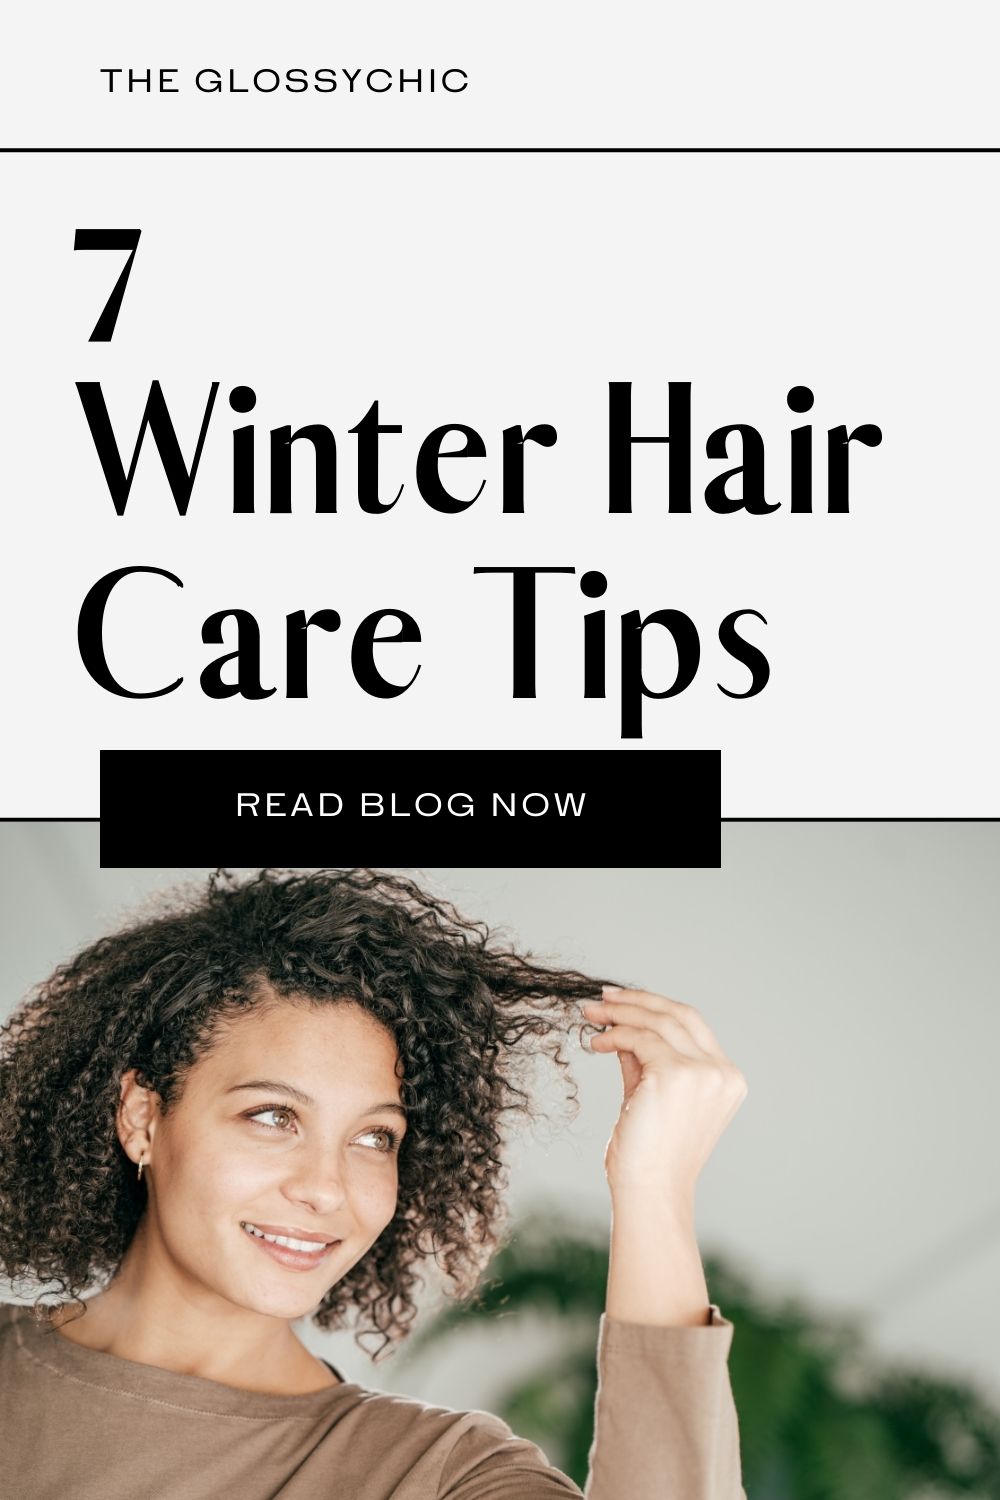 7 winter hair care tips - Spruce Up Your Hair Care Routine for Winter